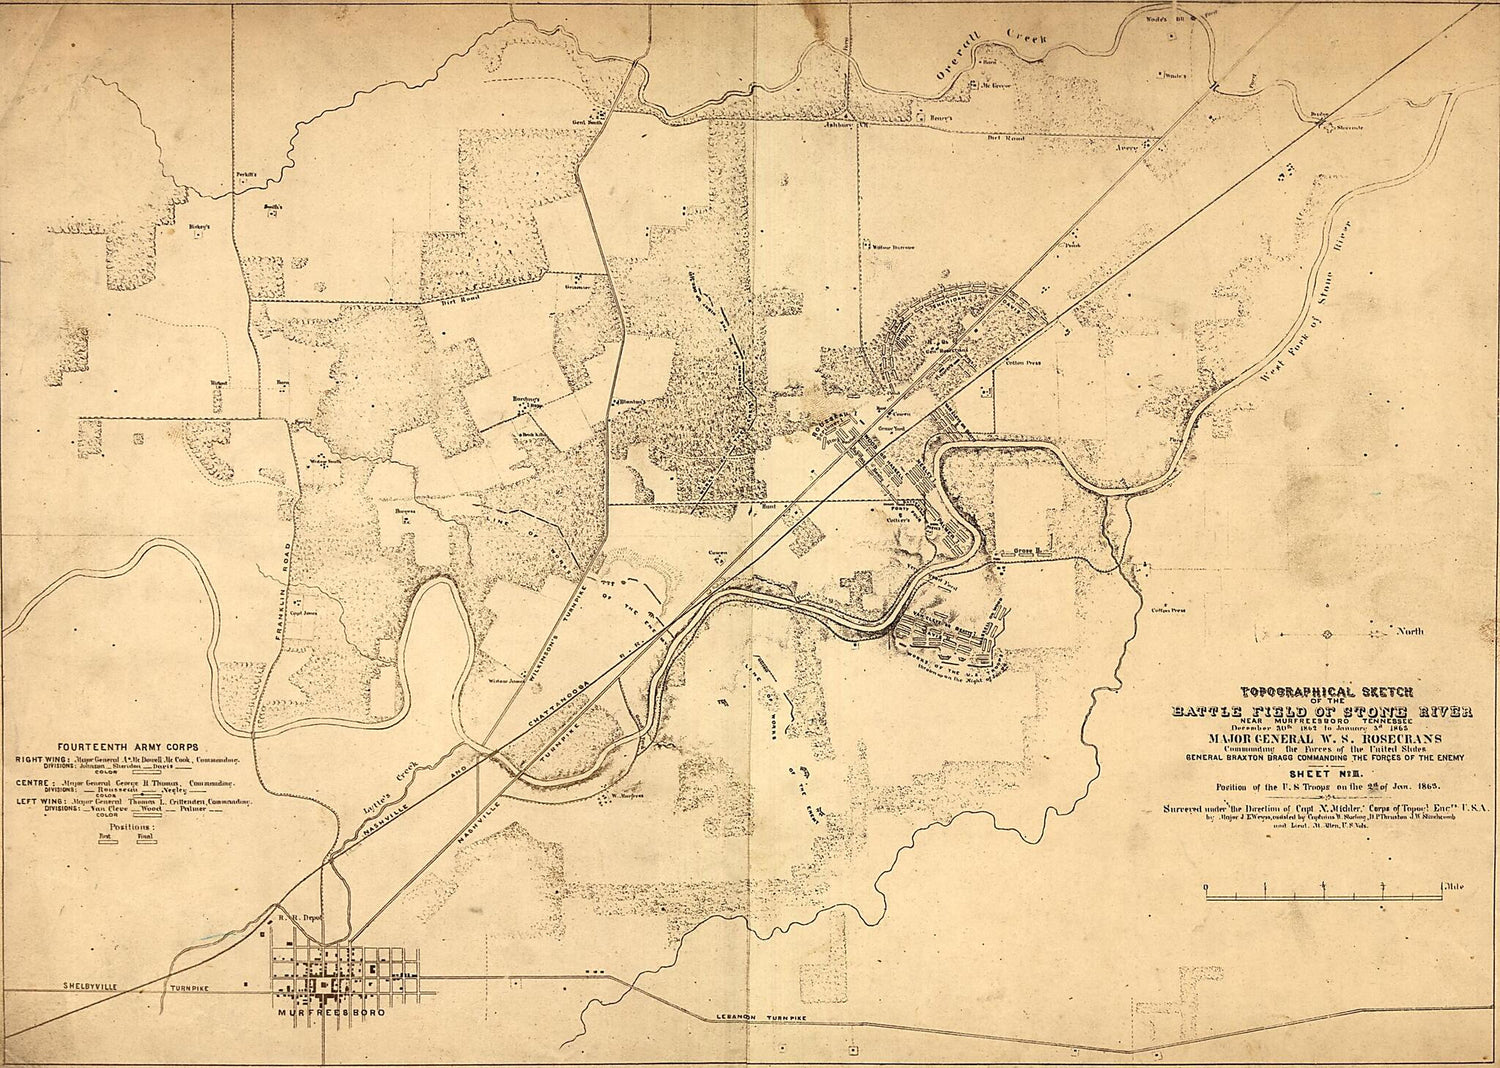 This old map of Topographical Sketch of the Battle Field of Stone River Near Murfreesboro, Tennessee, December 30th 1862 to January 3d from 1863 Position of the U.S. Troops On the 2d of Jan. from 1863 was created by N. (Nathaniel) Michler, J. E. Weyss in